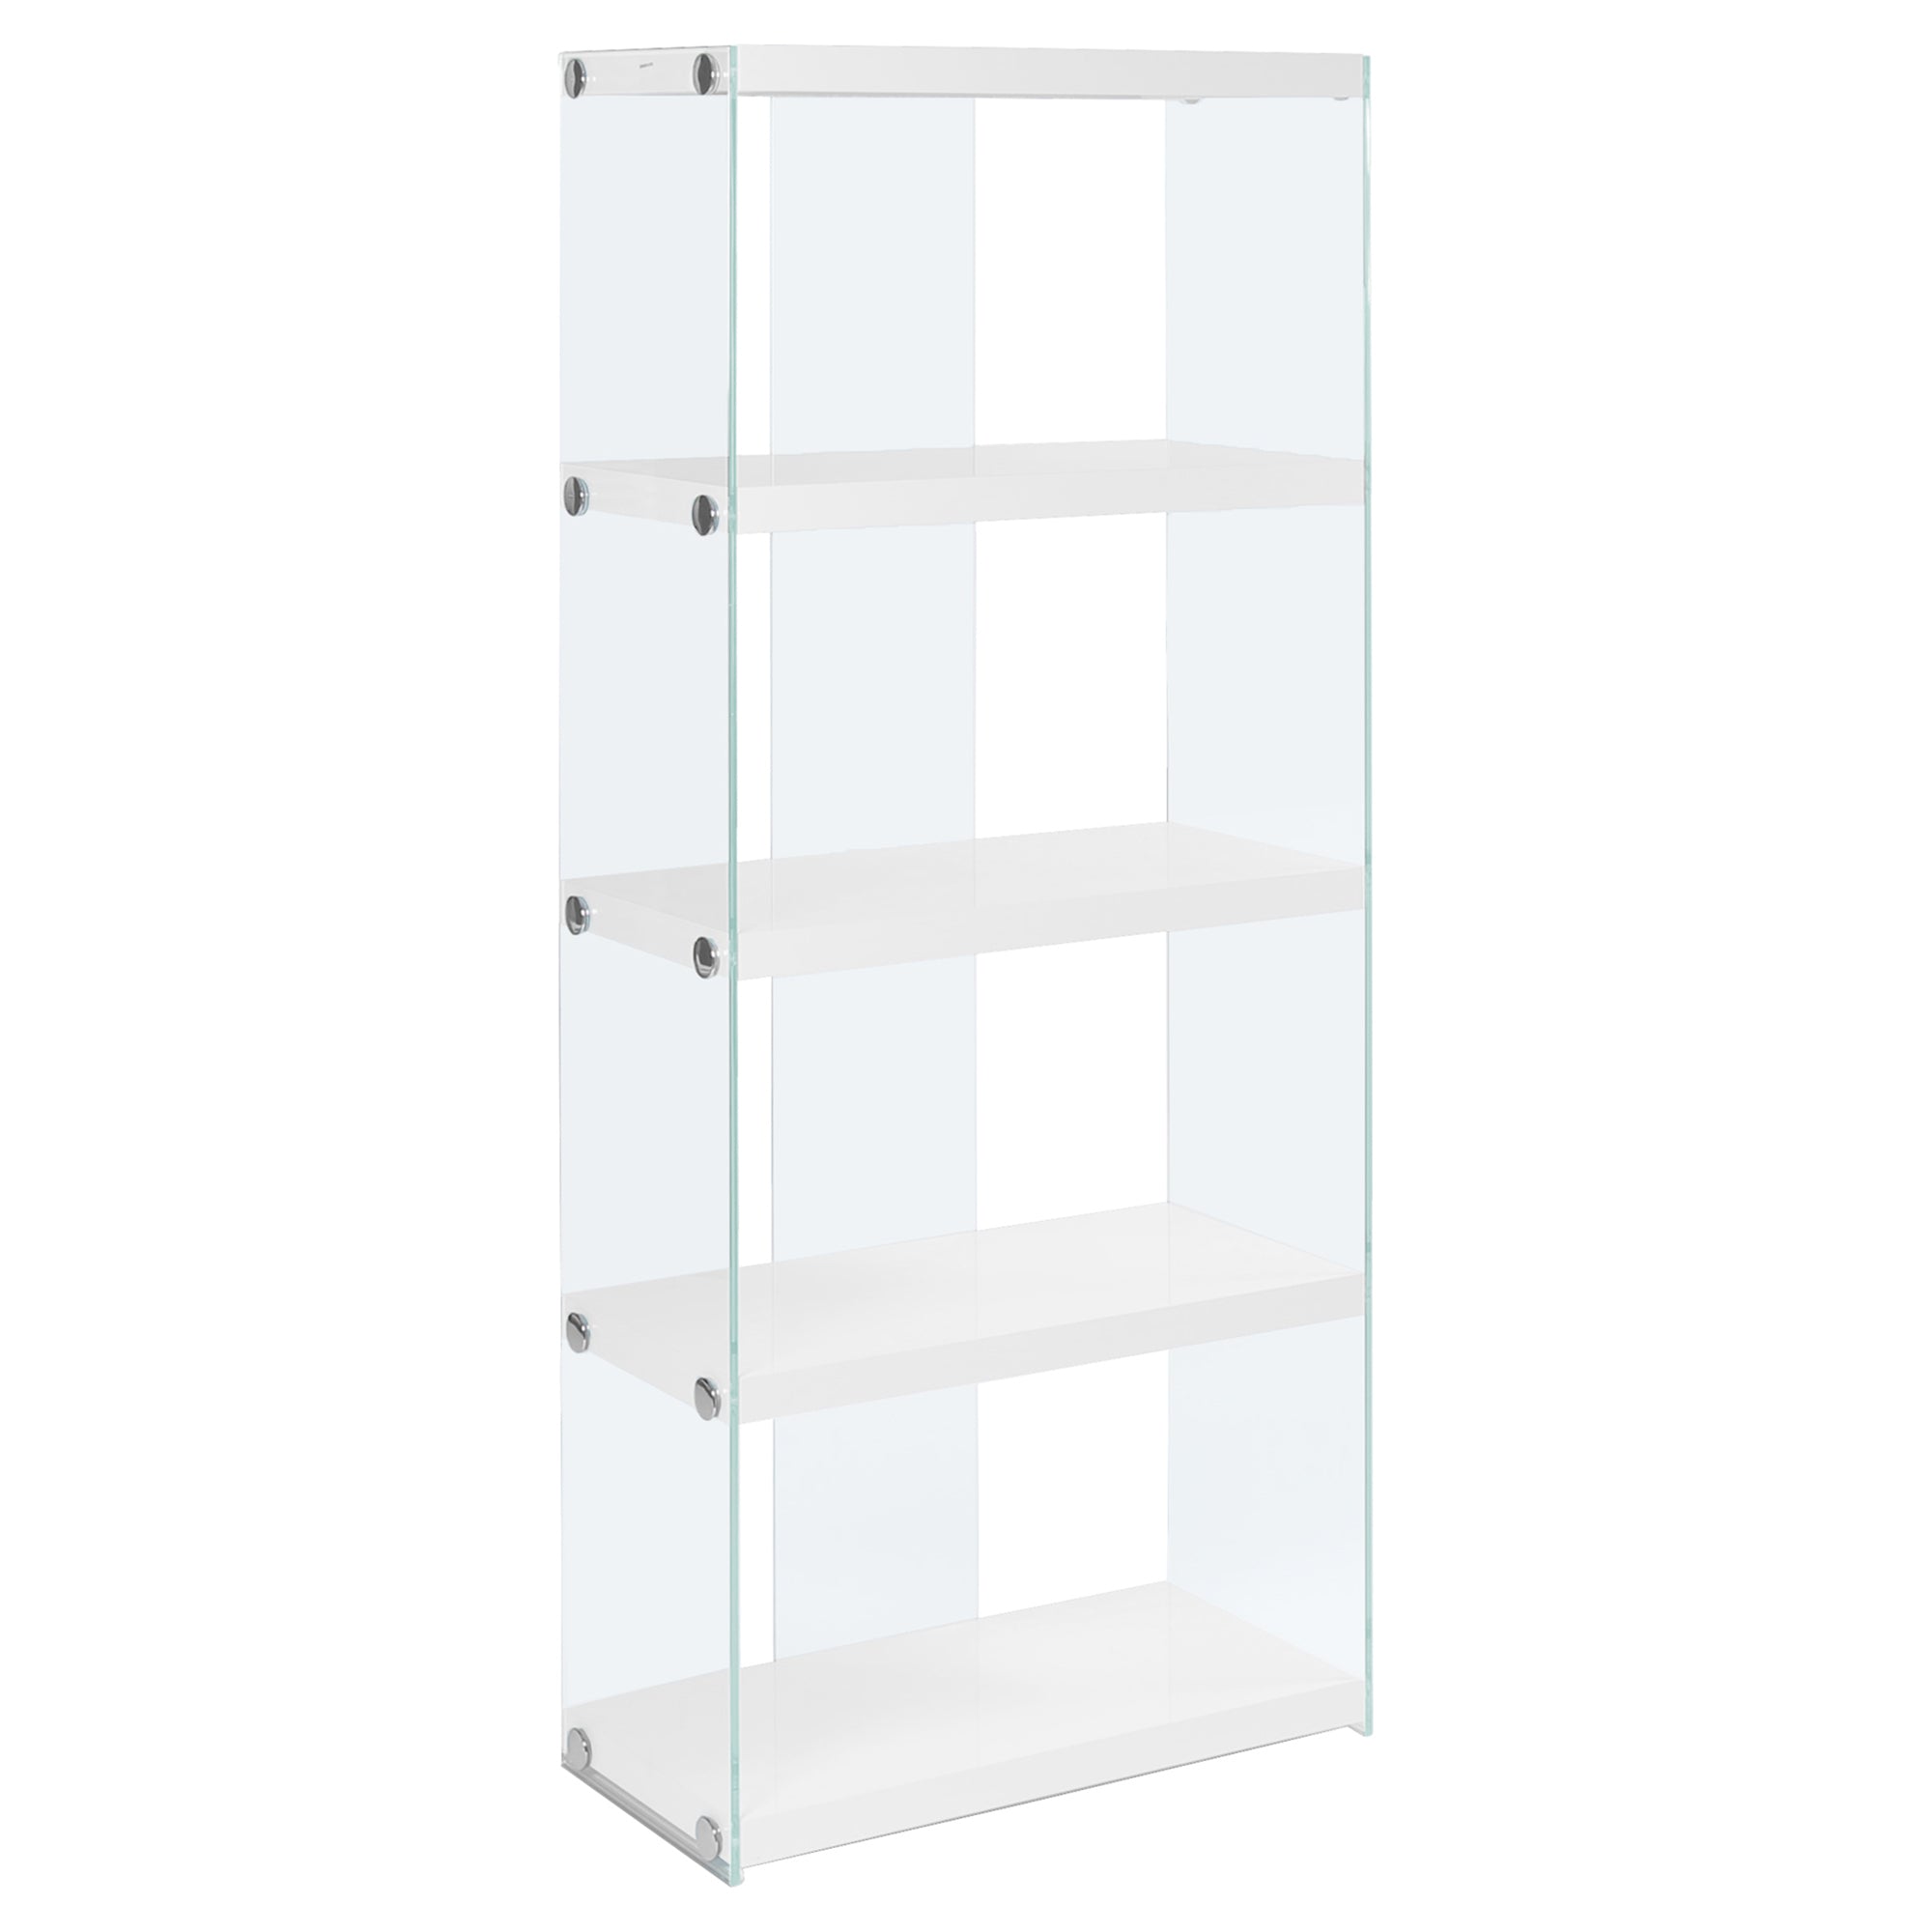 MN-163289    Bookshelf, Bookcase, Etagere, 5 Tier, Office, Bedroom, 60"H, Tempered Glass, Laminate, Glossy White, Clear, Contemporary, Modern